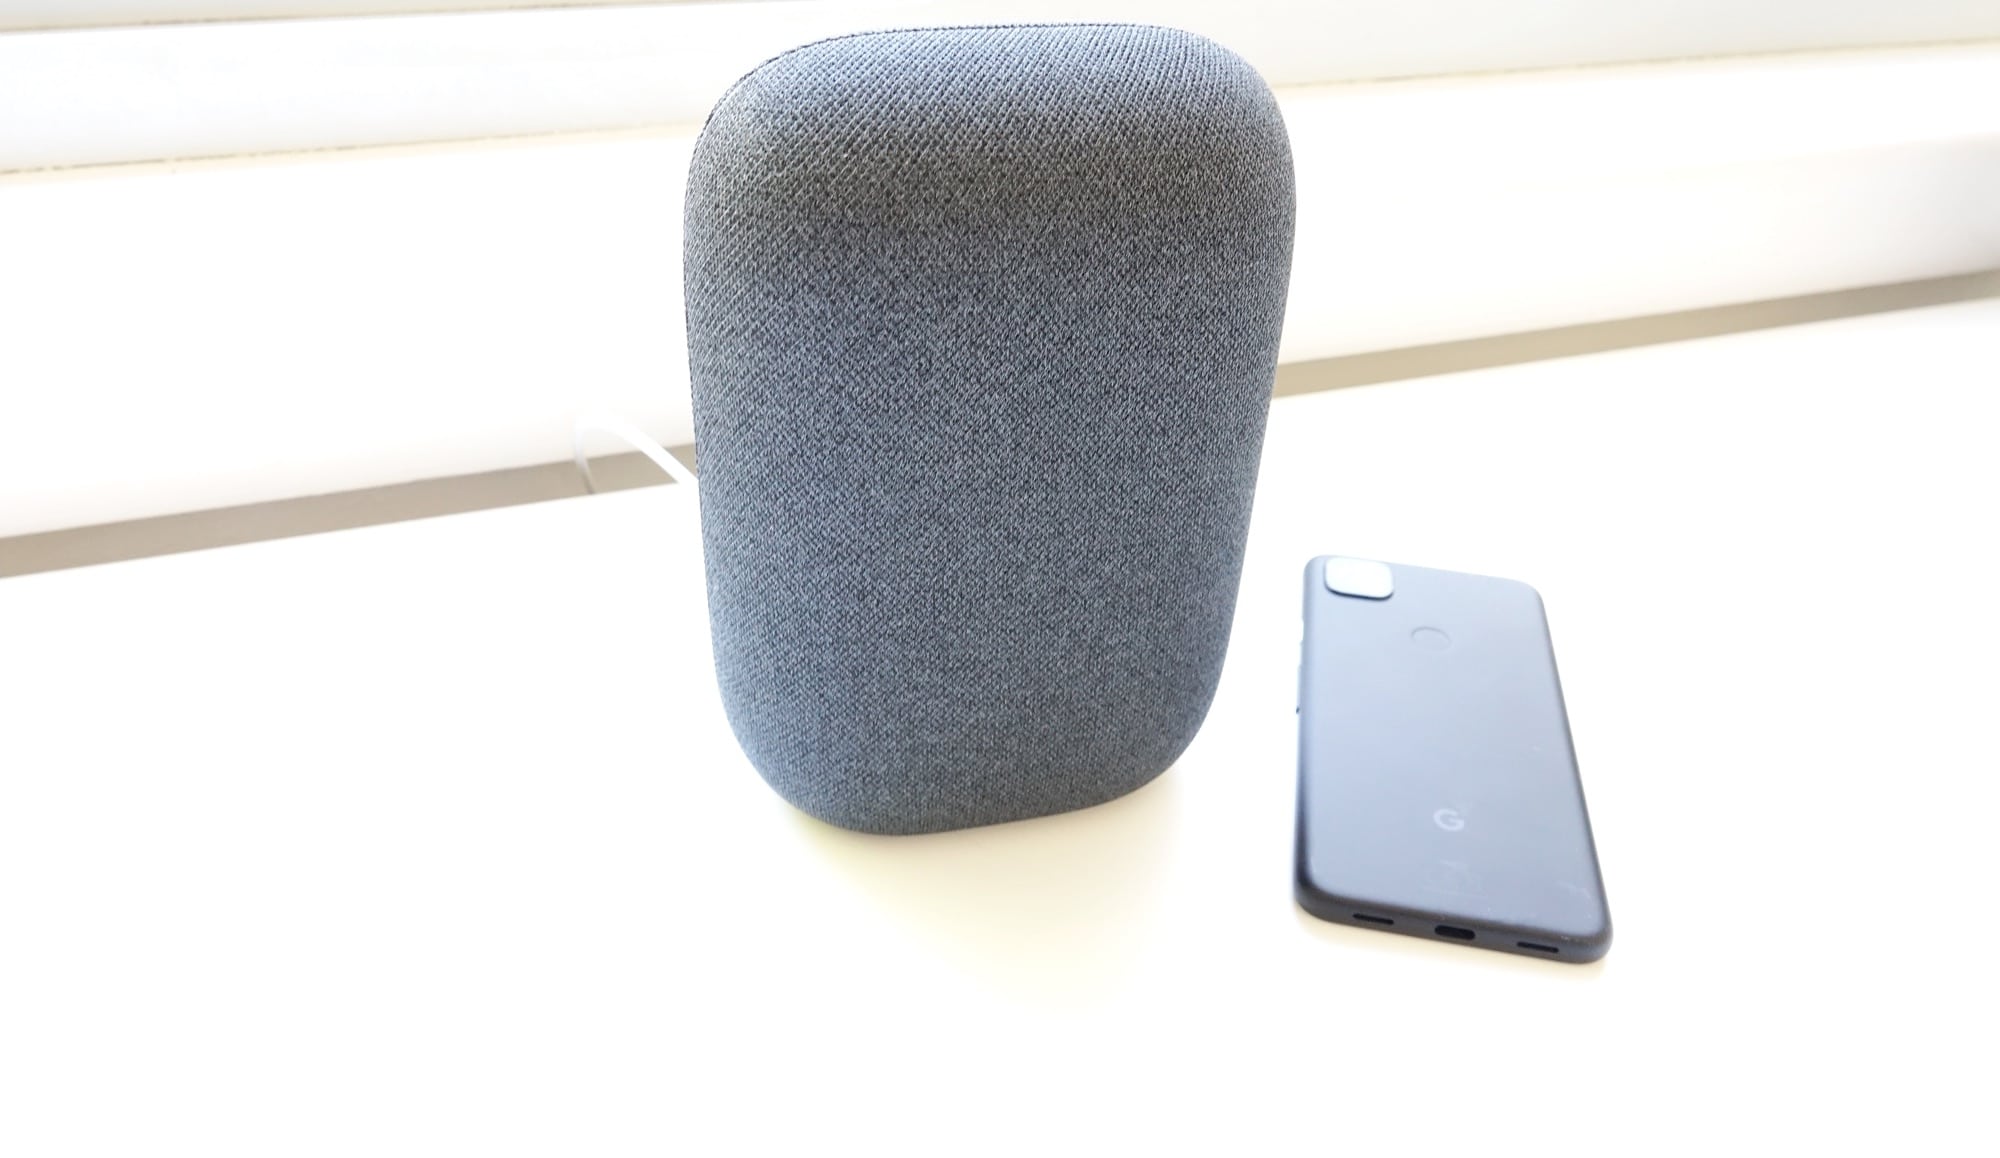 Google Nest Audio with the Google Pixel 4a